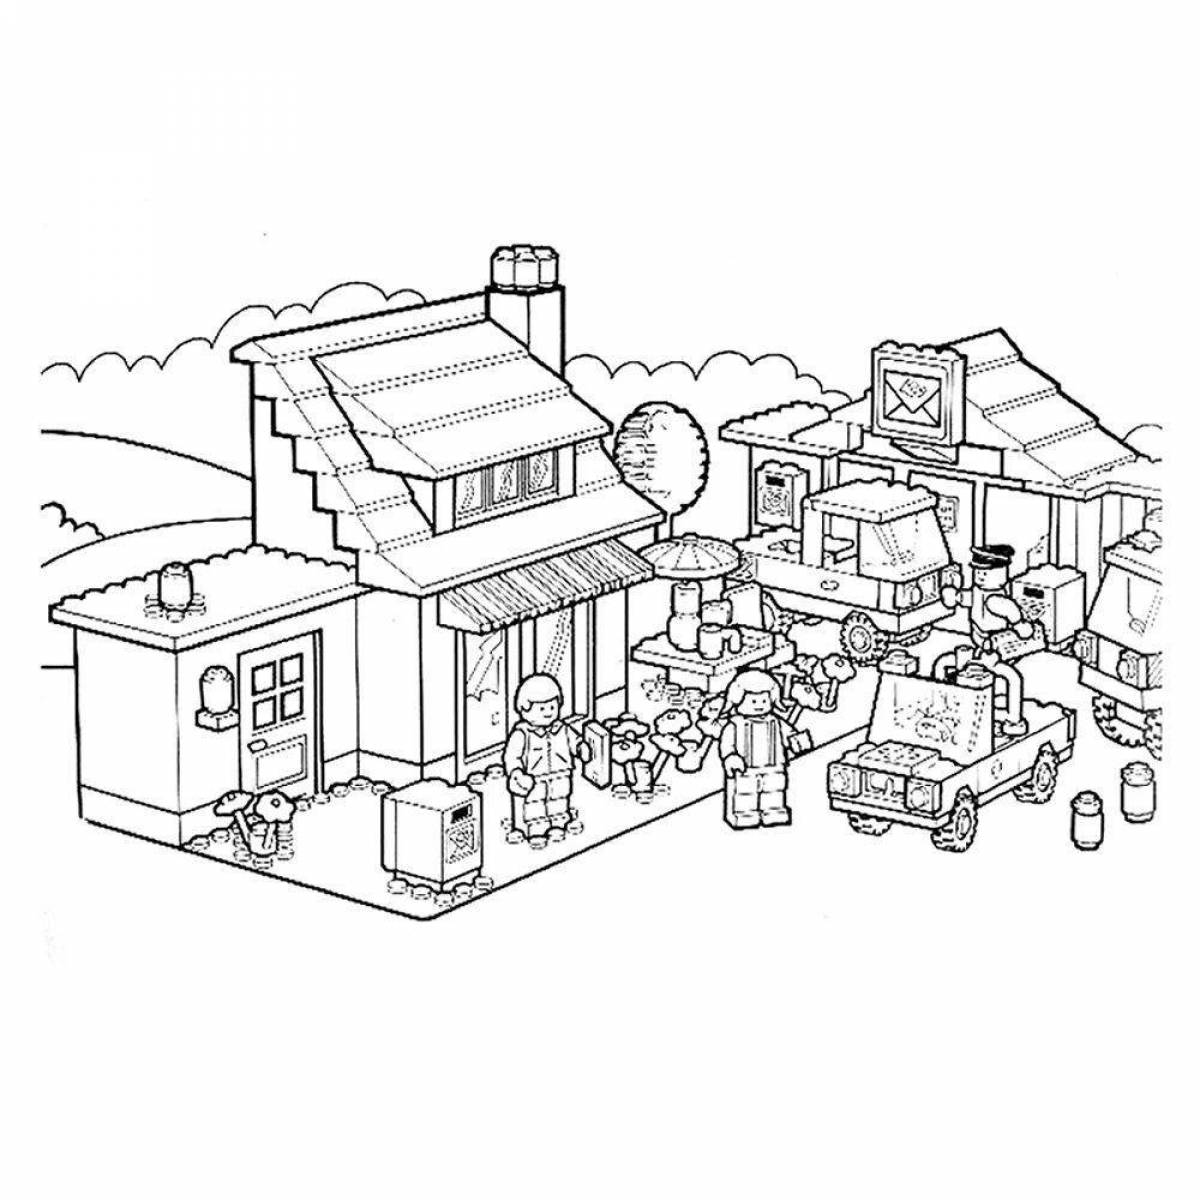 Impressive minecraft house coloring page